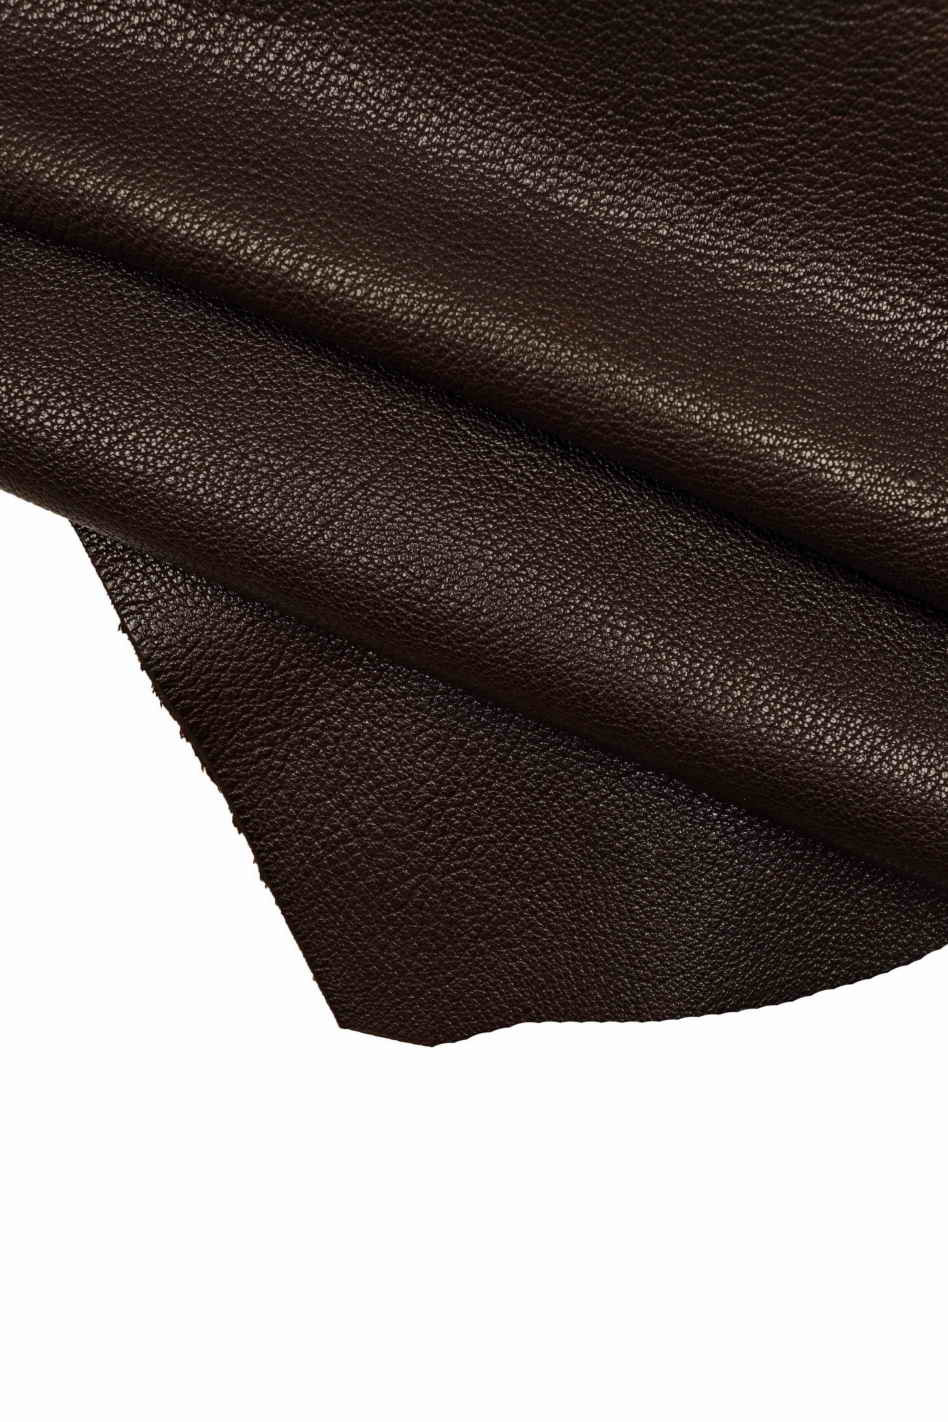 Dark Brown, Metallic Leather Grain Upholstery Faux Leather By The Yard